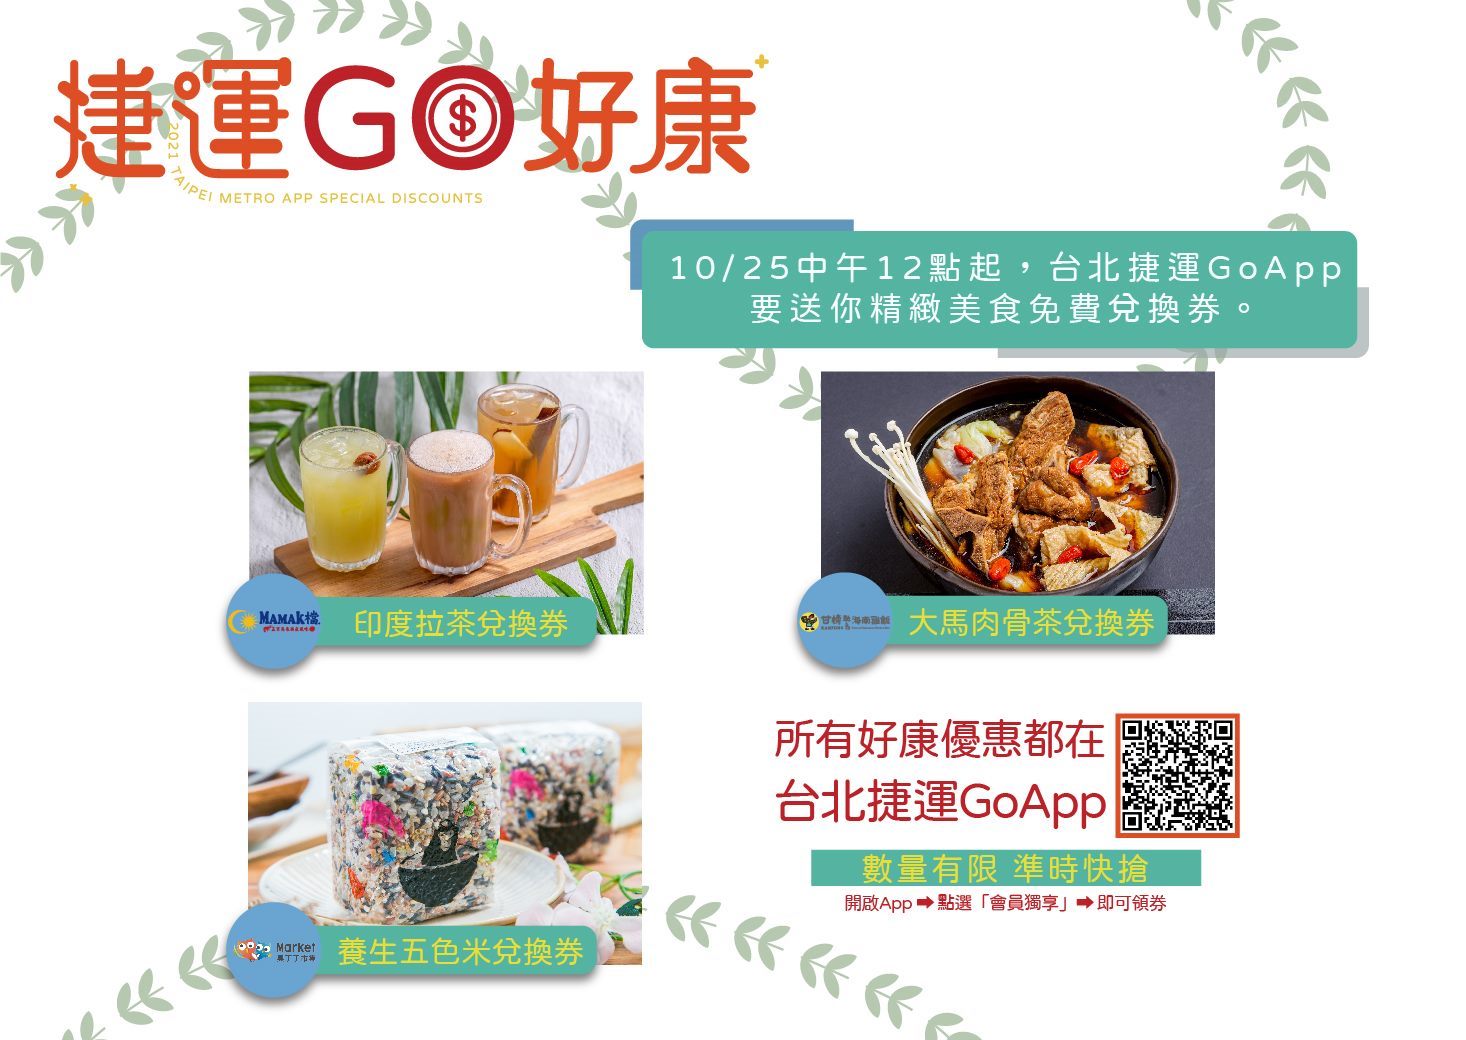 ​Taipei Metro Go APP to Offer Vouchers on Members’ Day